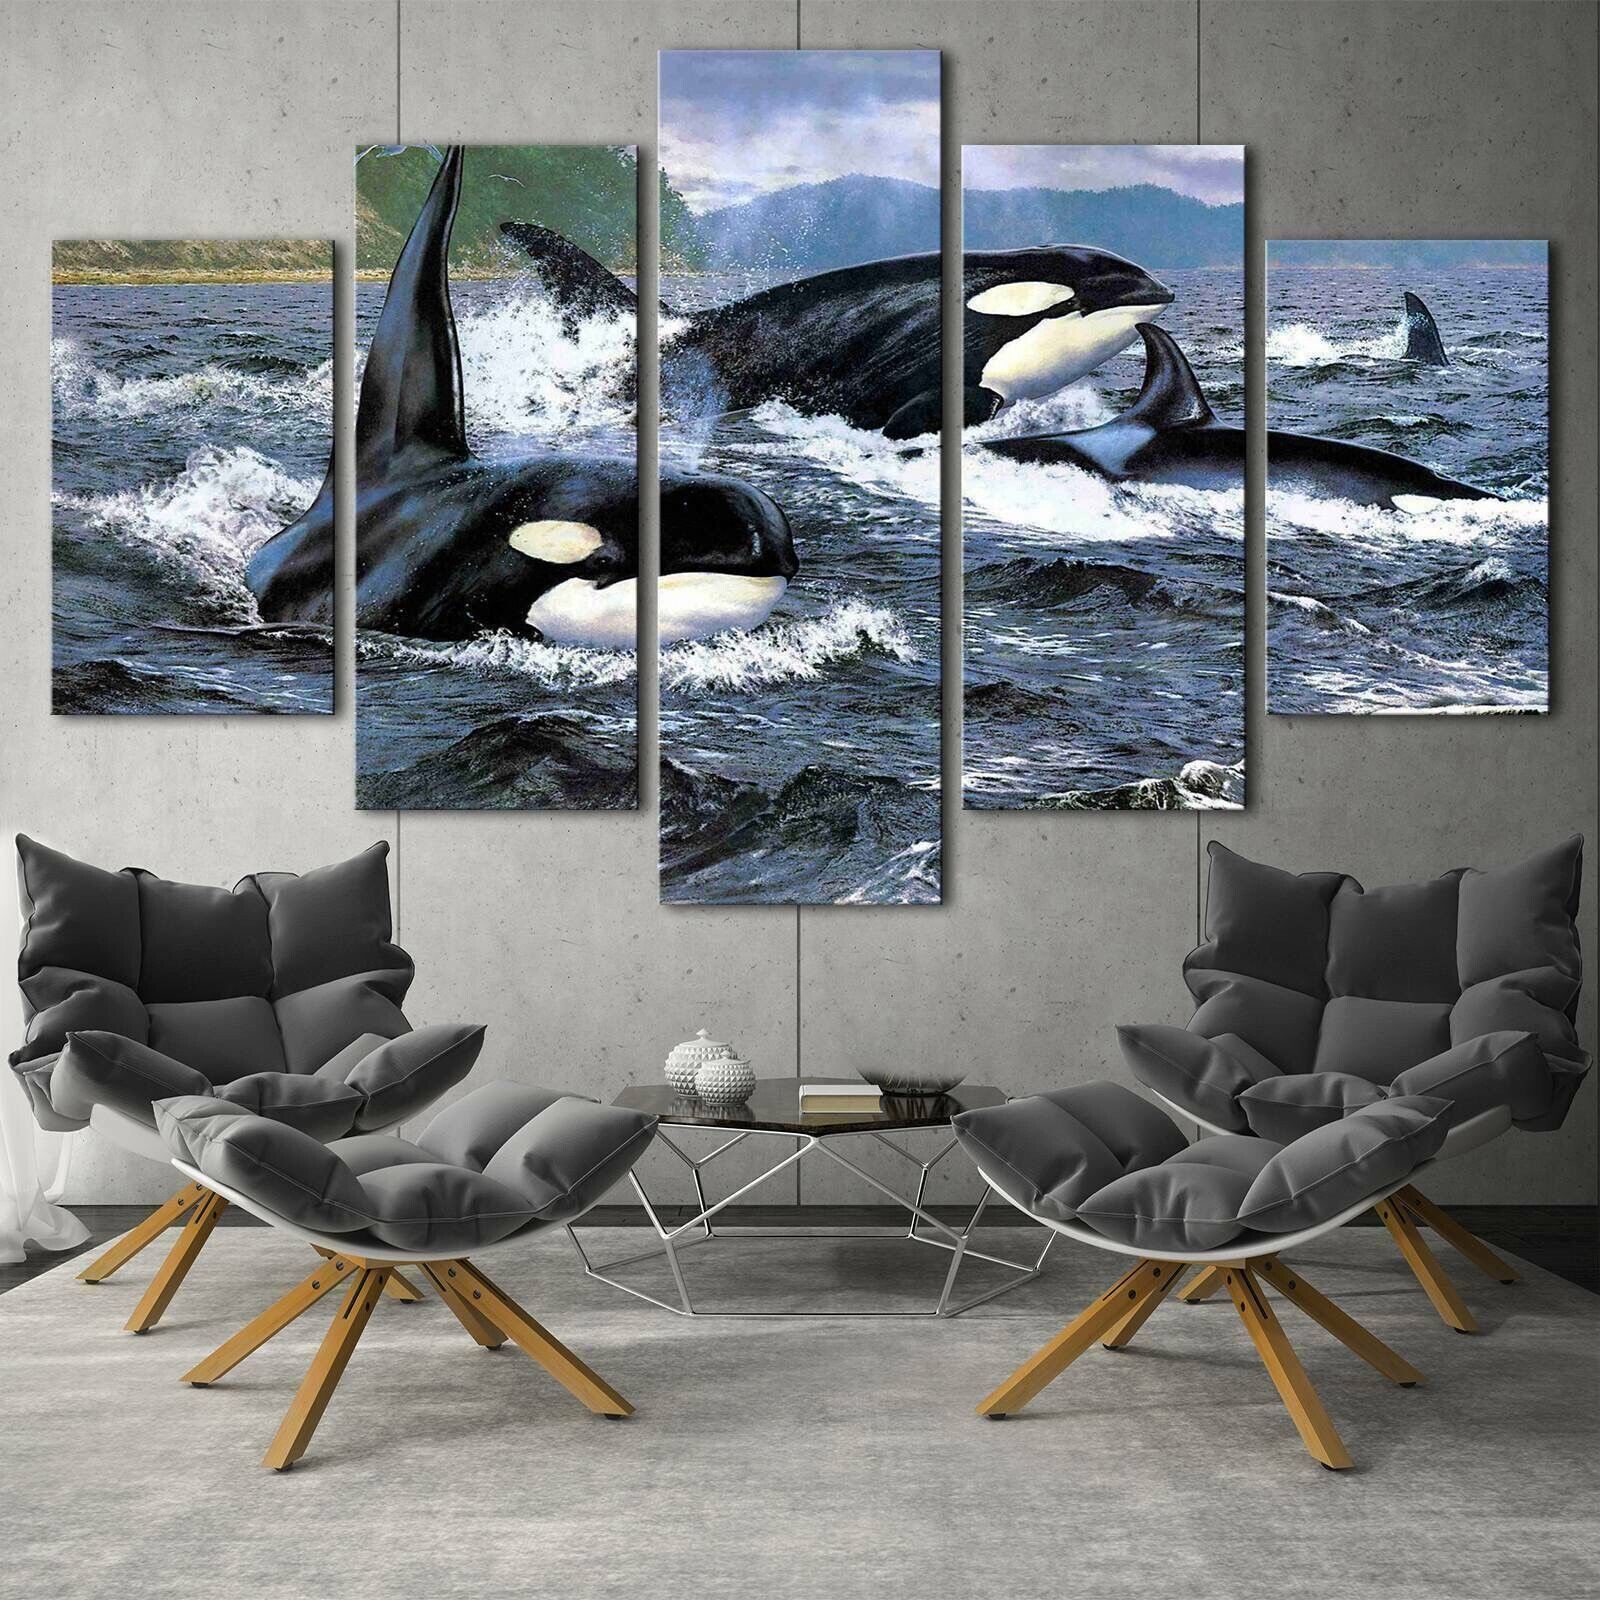 Orca Stration Killer Whale Ocean Poster 5 Panel Canvas Print Wall Art Home  Decor | Ebay For 2018 Whale Wall Art (Gallery 19 of 20)